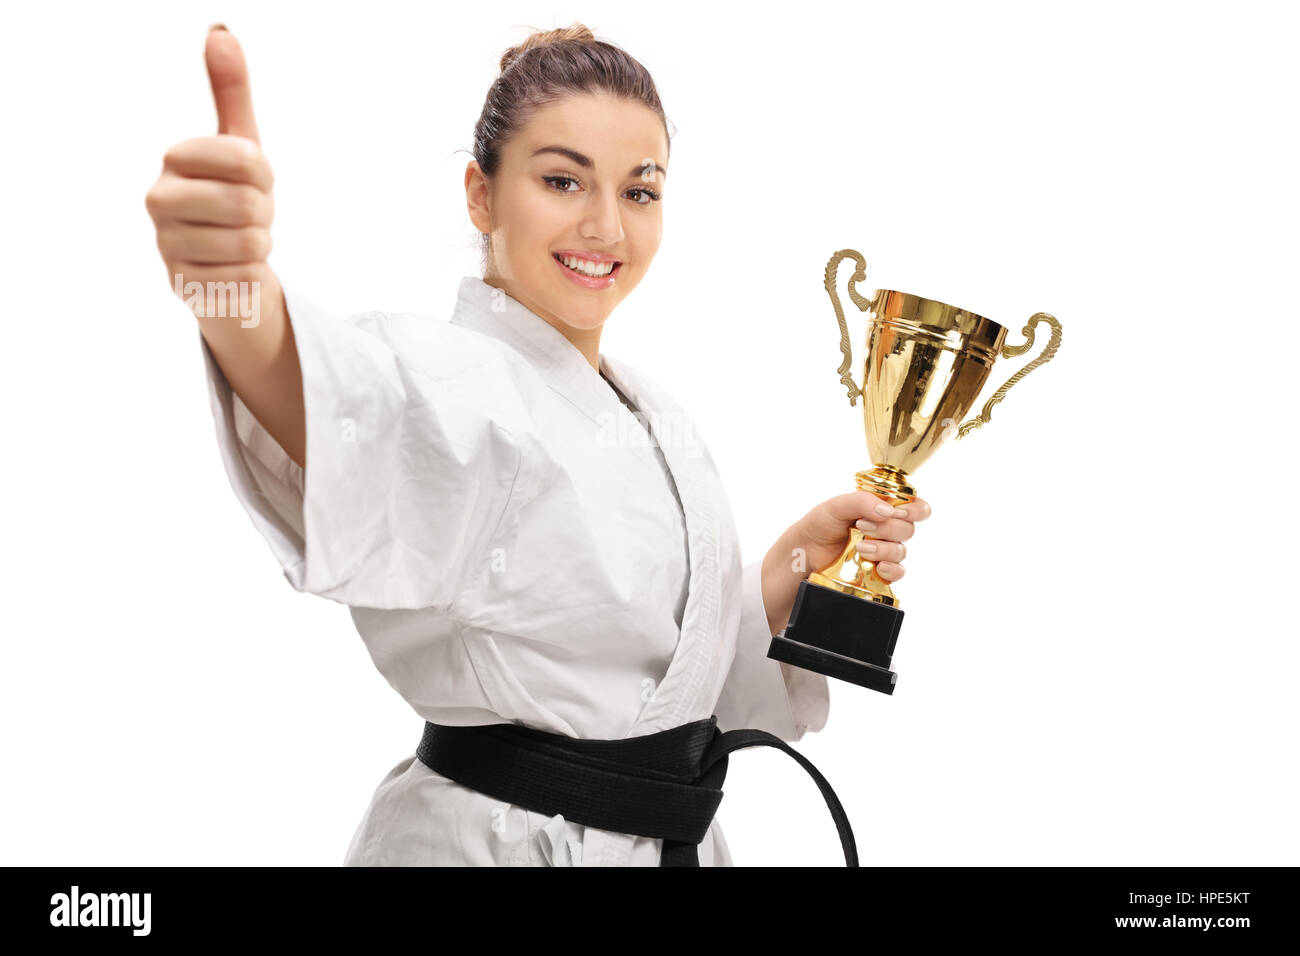 Happy karate girl giving a thumb up and holding a golden trophy isolated on white background Stock Photo